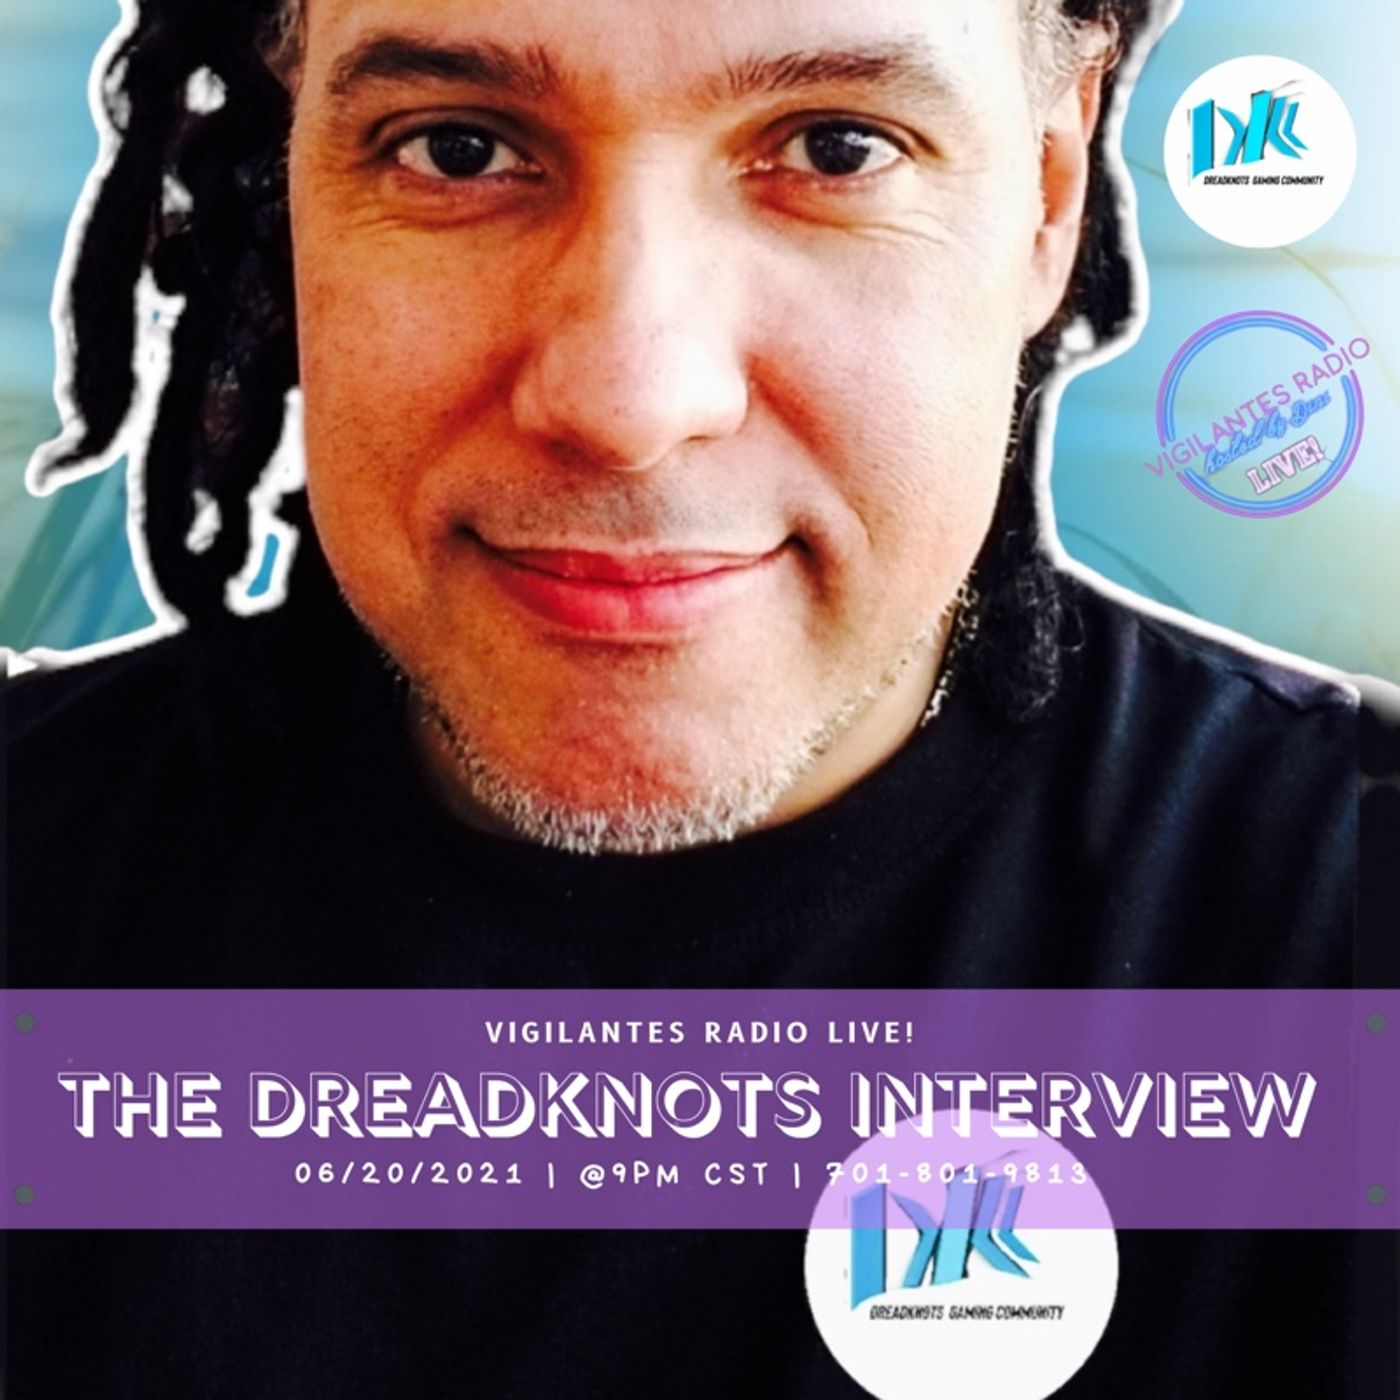 The DreadKnots Interview. Image